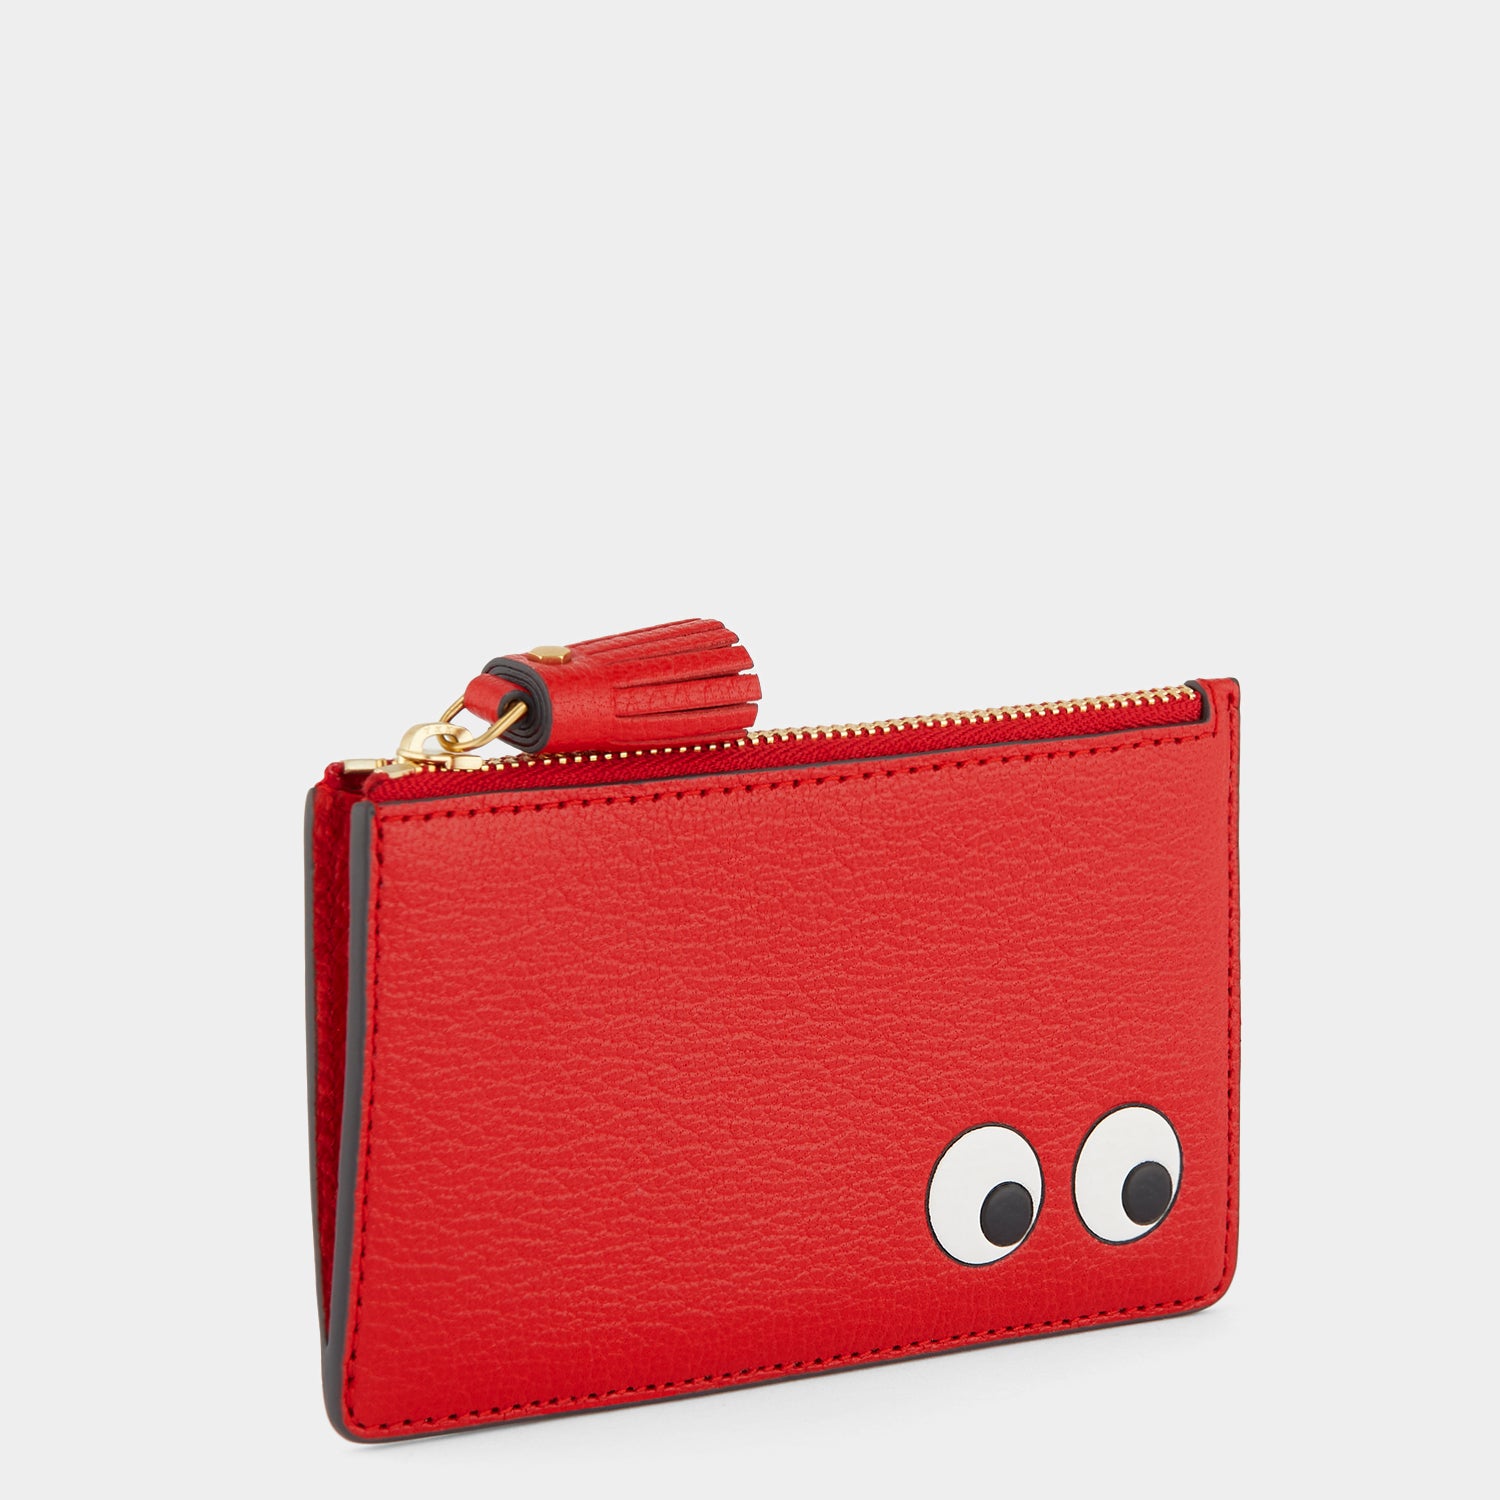 Eyes Zipped Card Case -

                  
                    Capra in Bright Red -
                  

                  Anya Hindmarch UK
